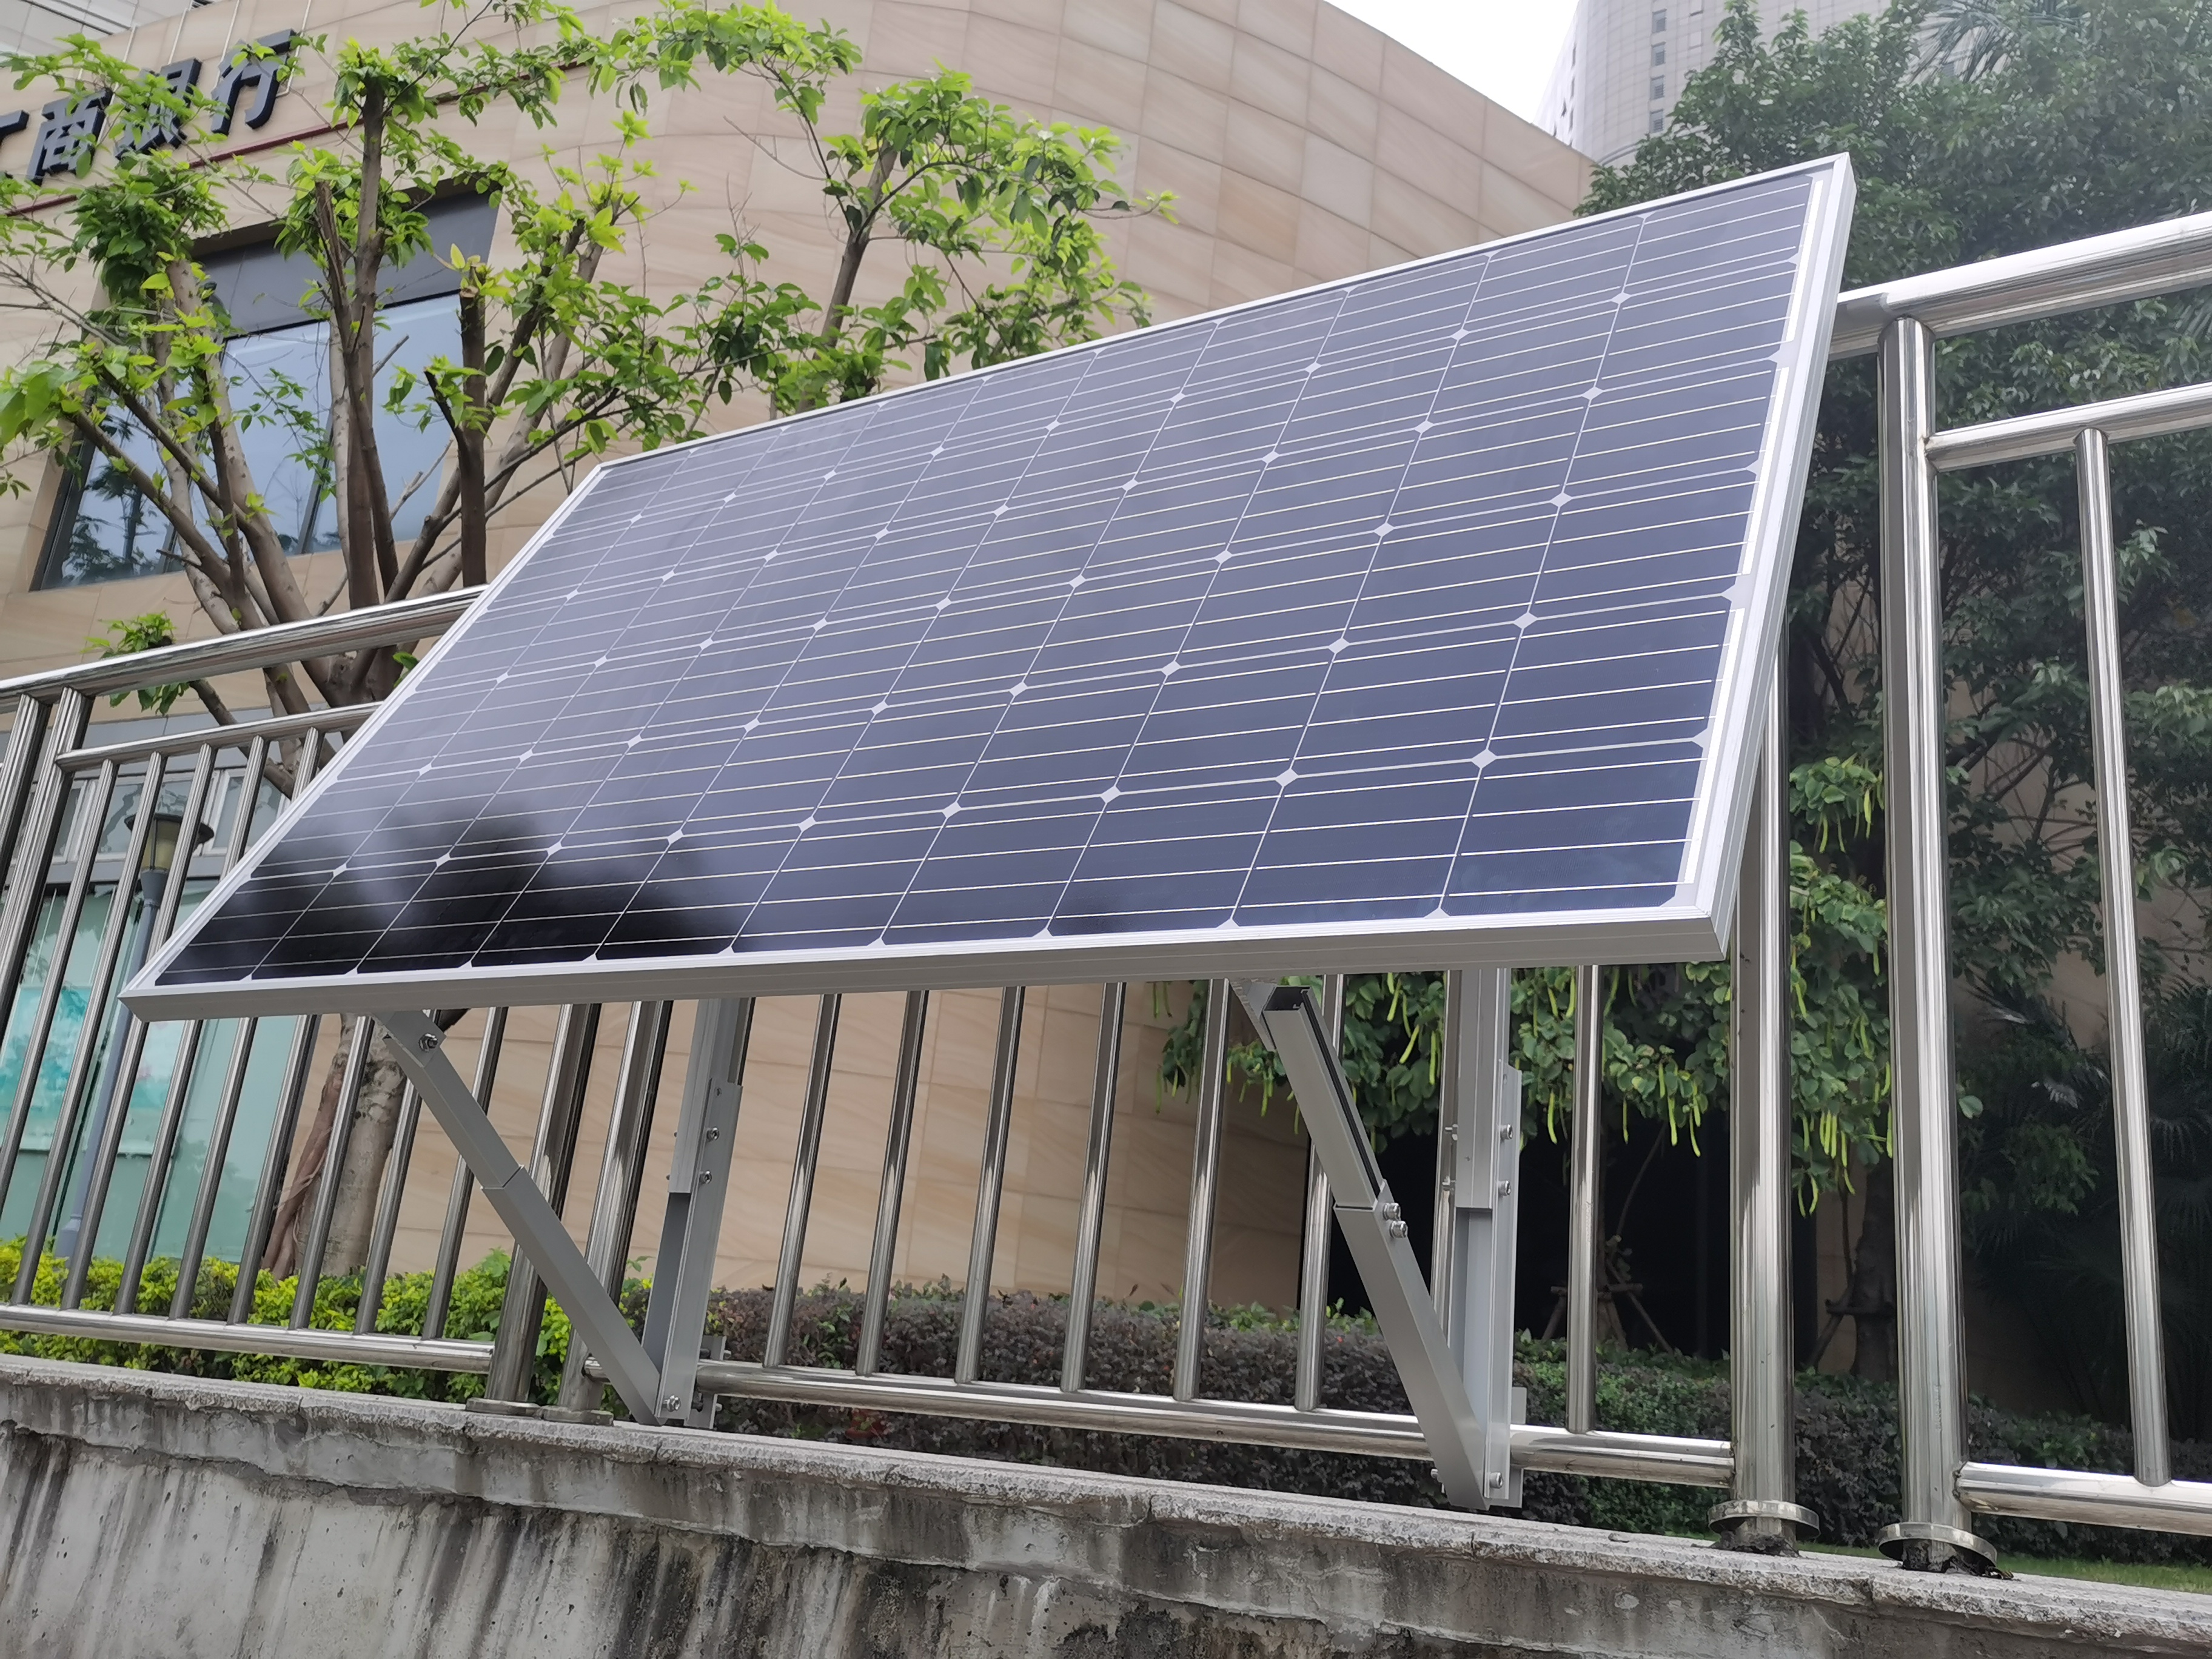 What are the benefits for mounting solar panels on balcony fences